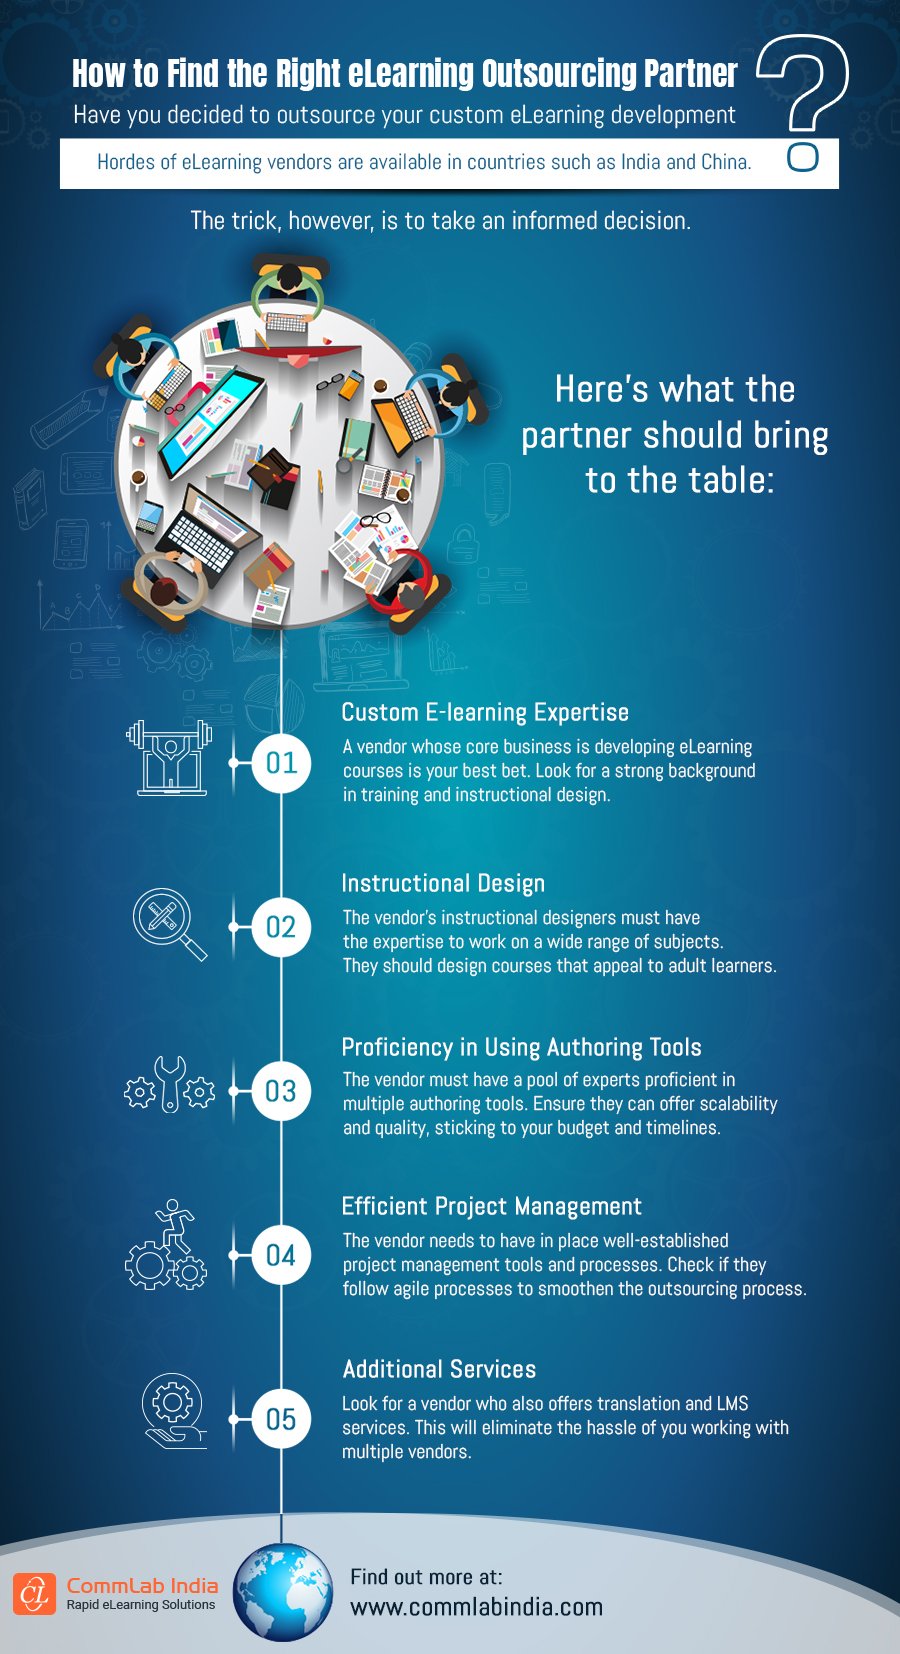 How to Find the Right E-learning Outsourcing Partner? [Infographic]